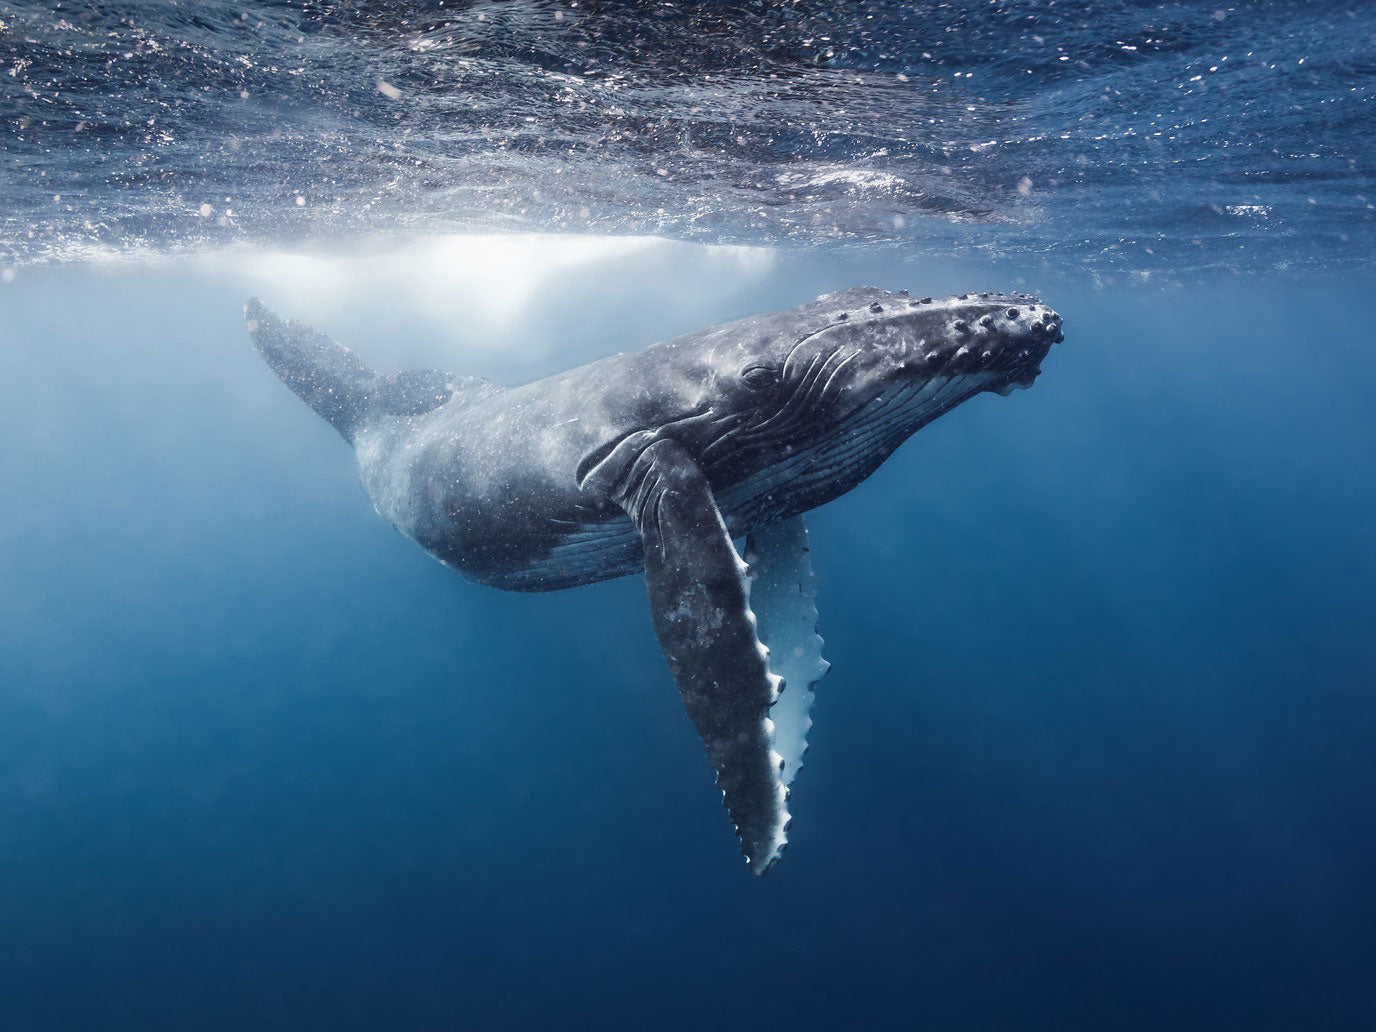 Tonga Underwater with Humpback Whales and Grant Thomas